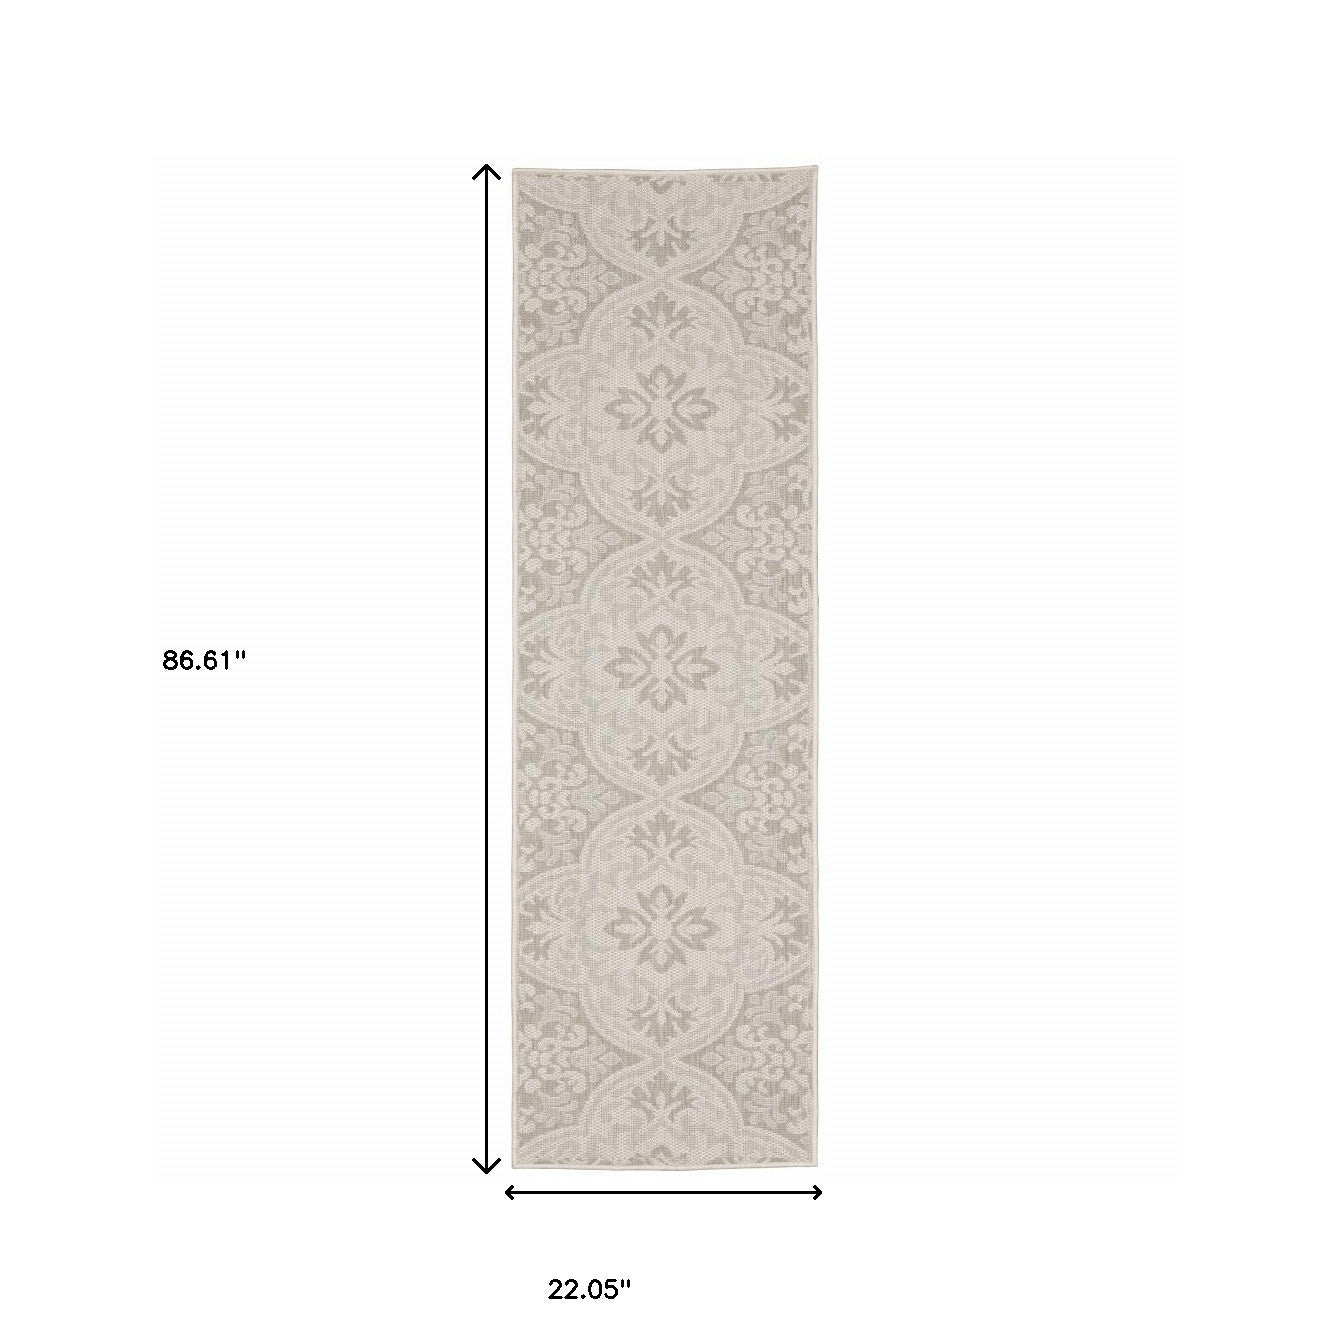 2' X 7' Ivory Floral Stain Resistant Indoor Outdoor Area Rug